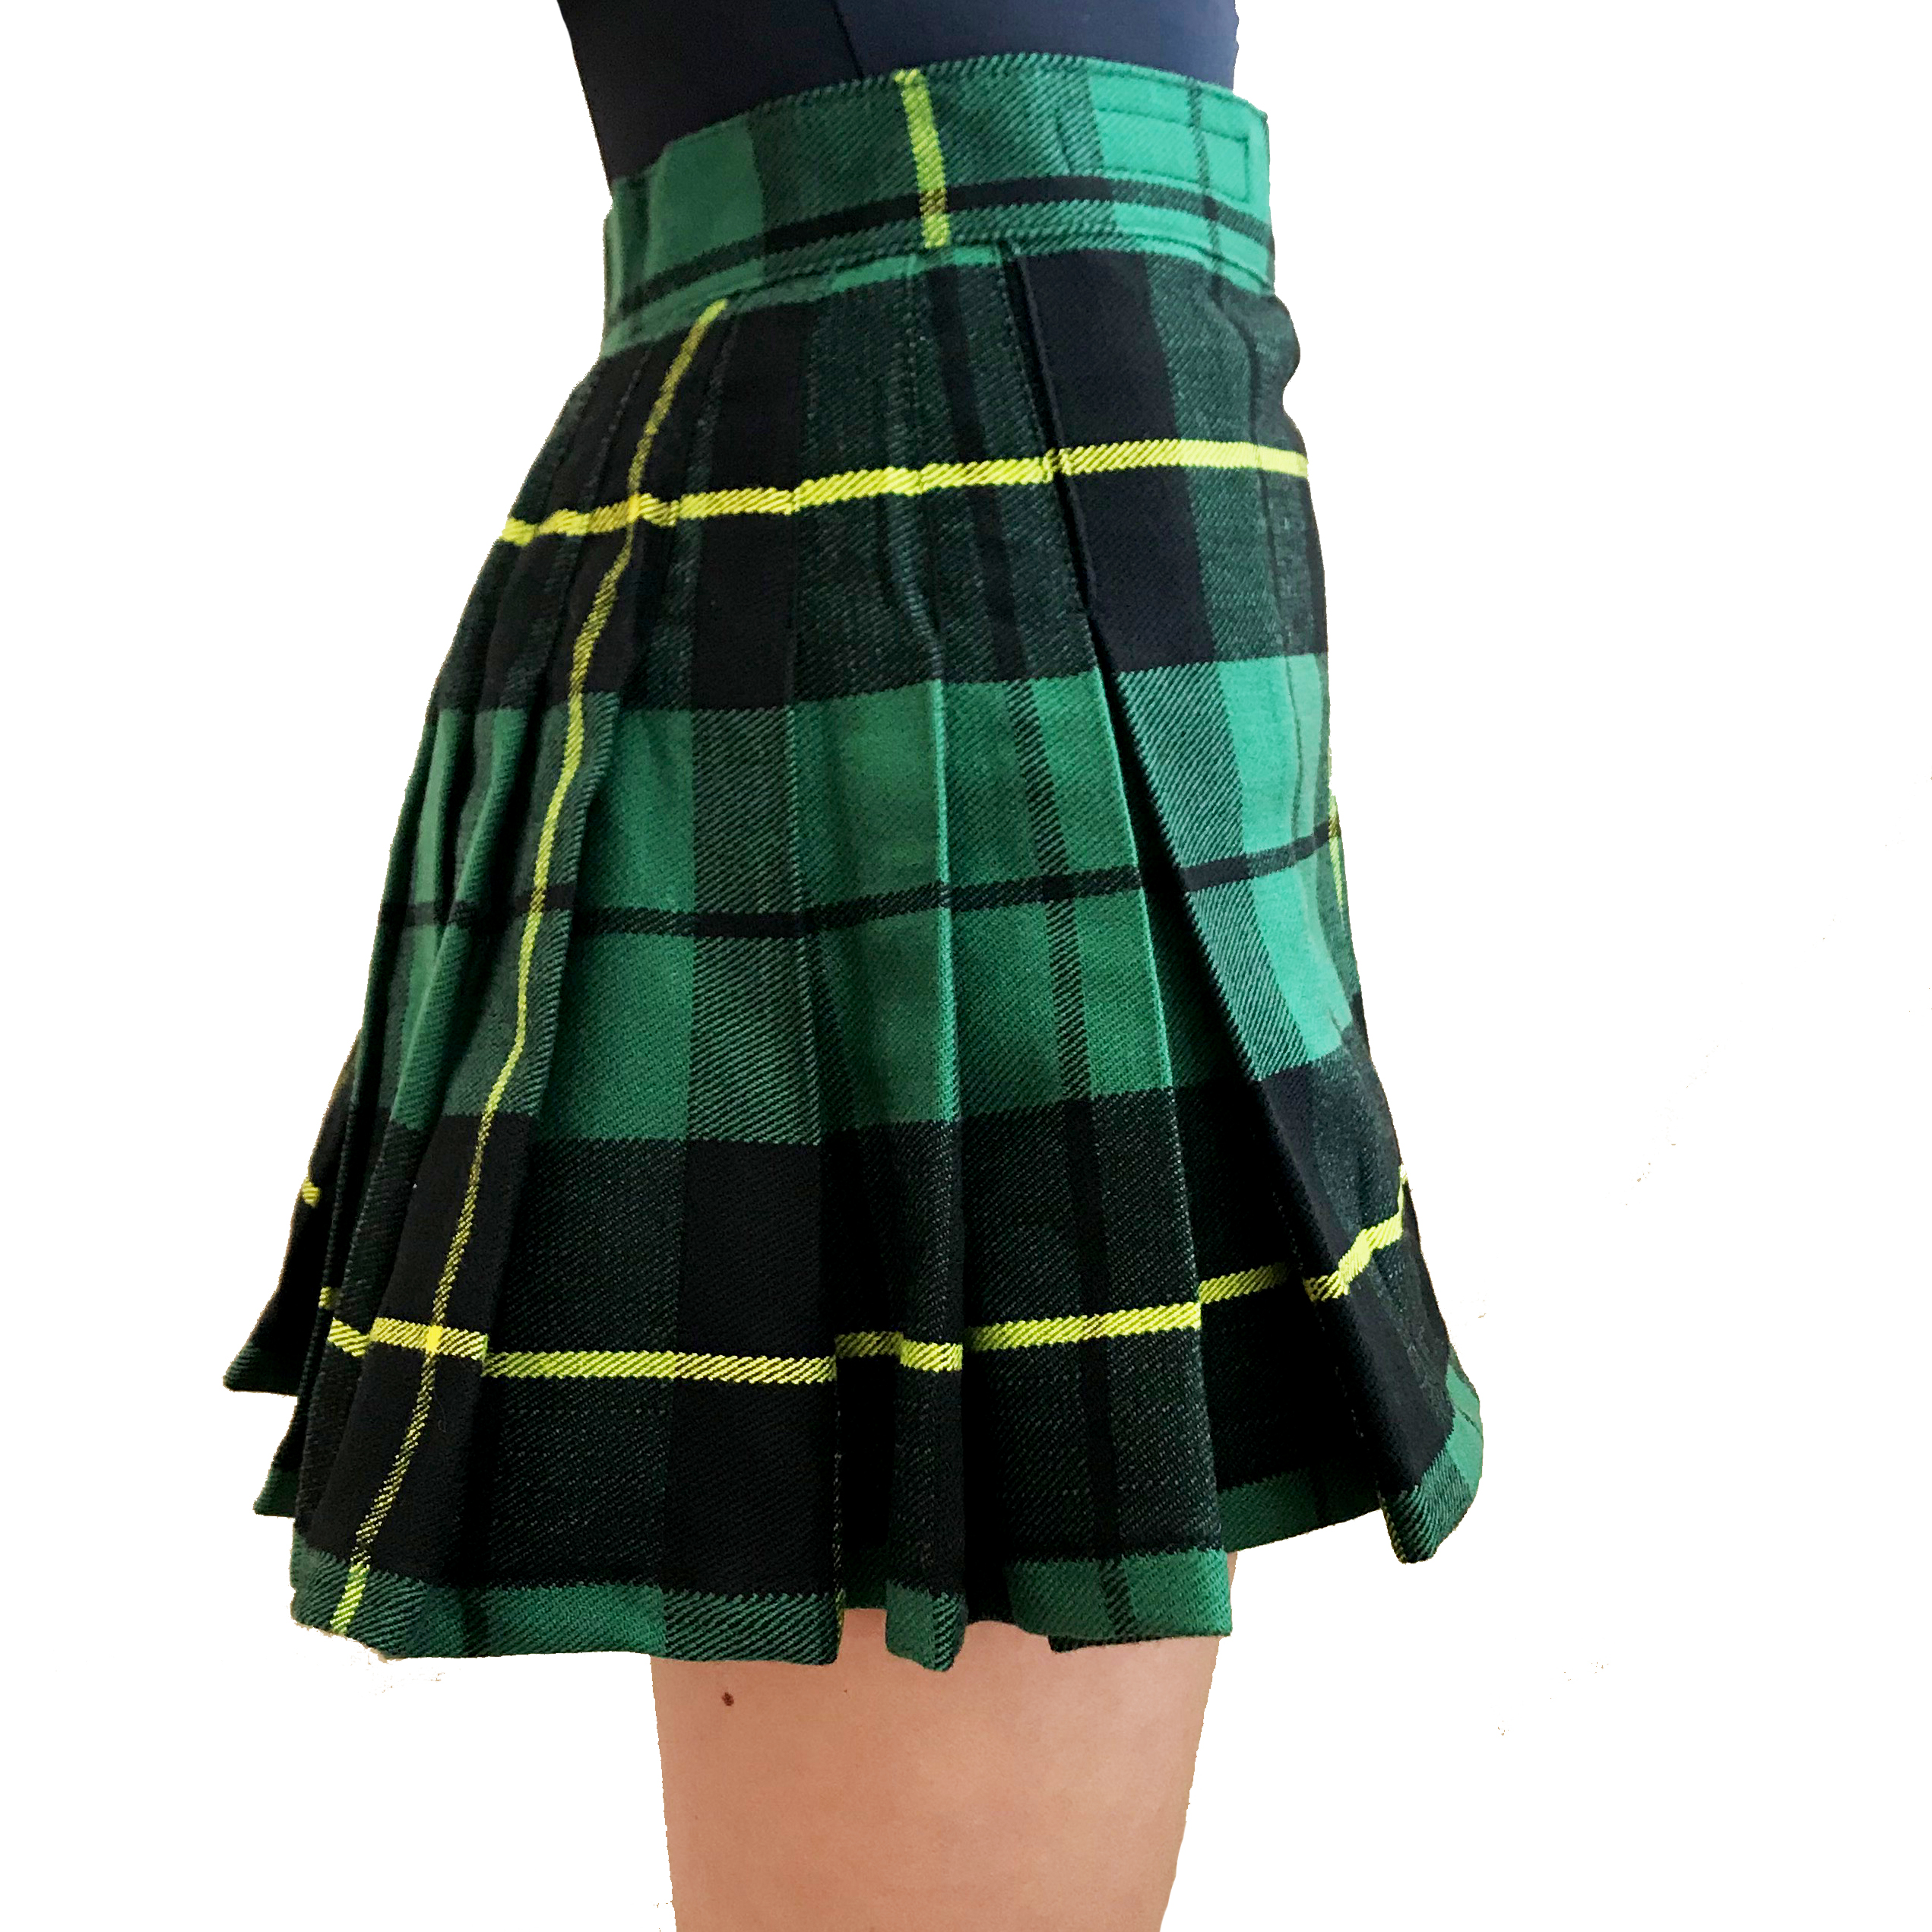 Choose Size & Style New Fashion Highland Pipers Drummer Kilt Spats Shoes 